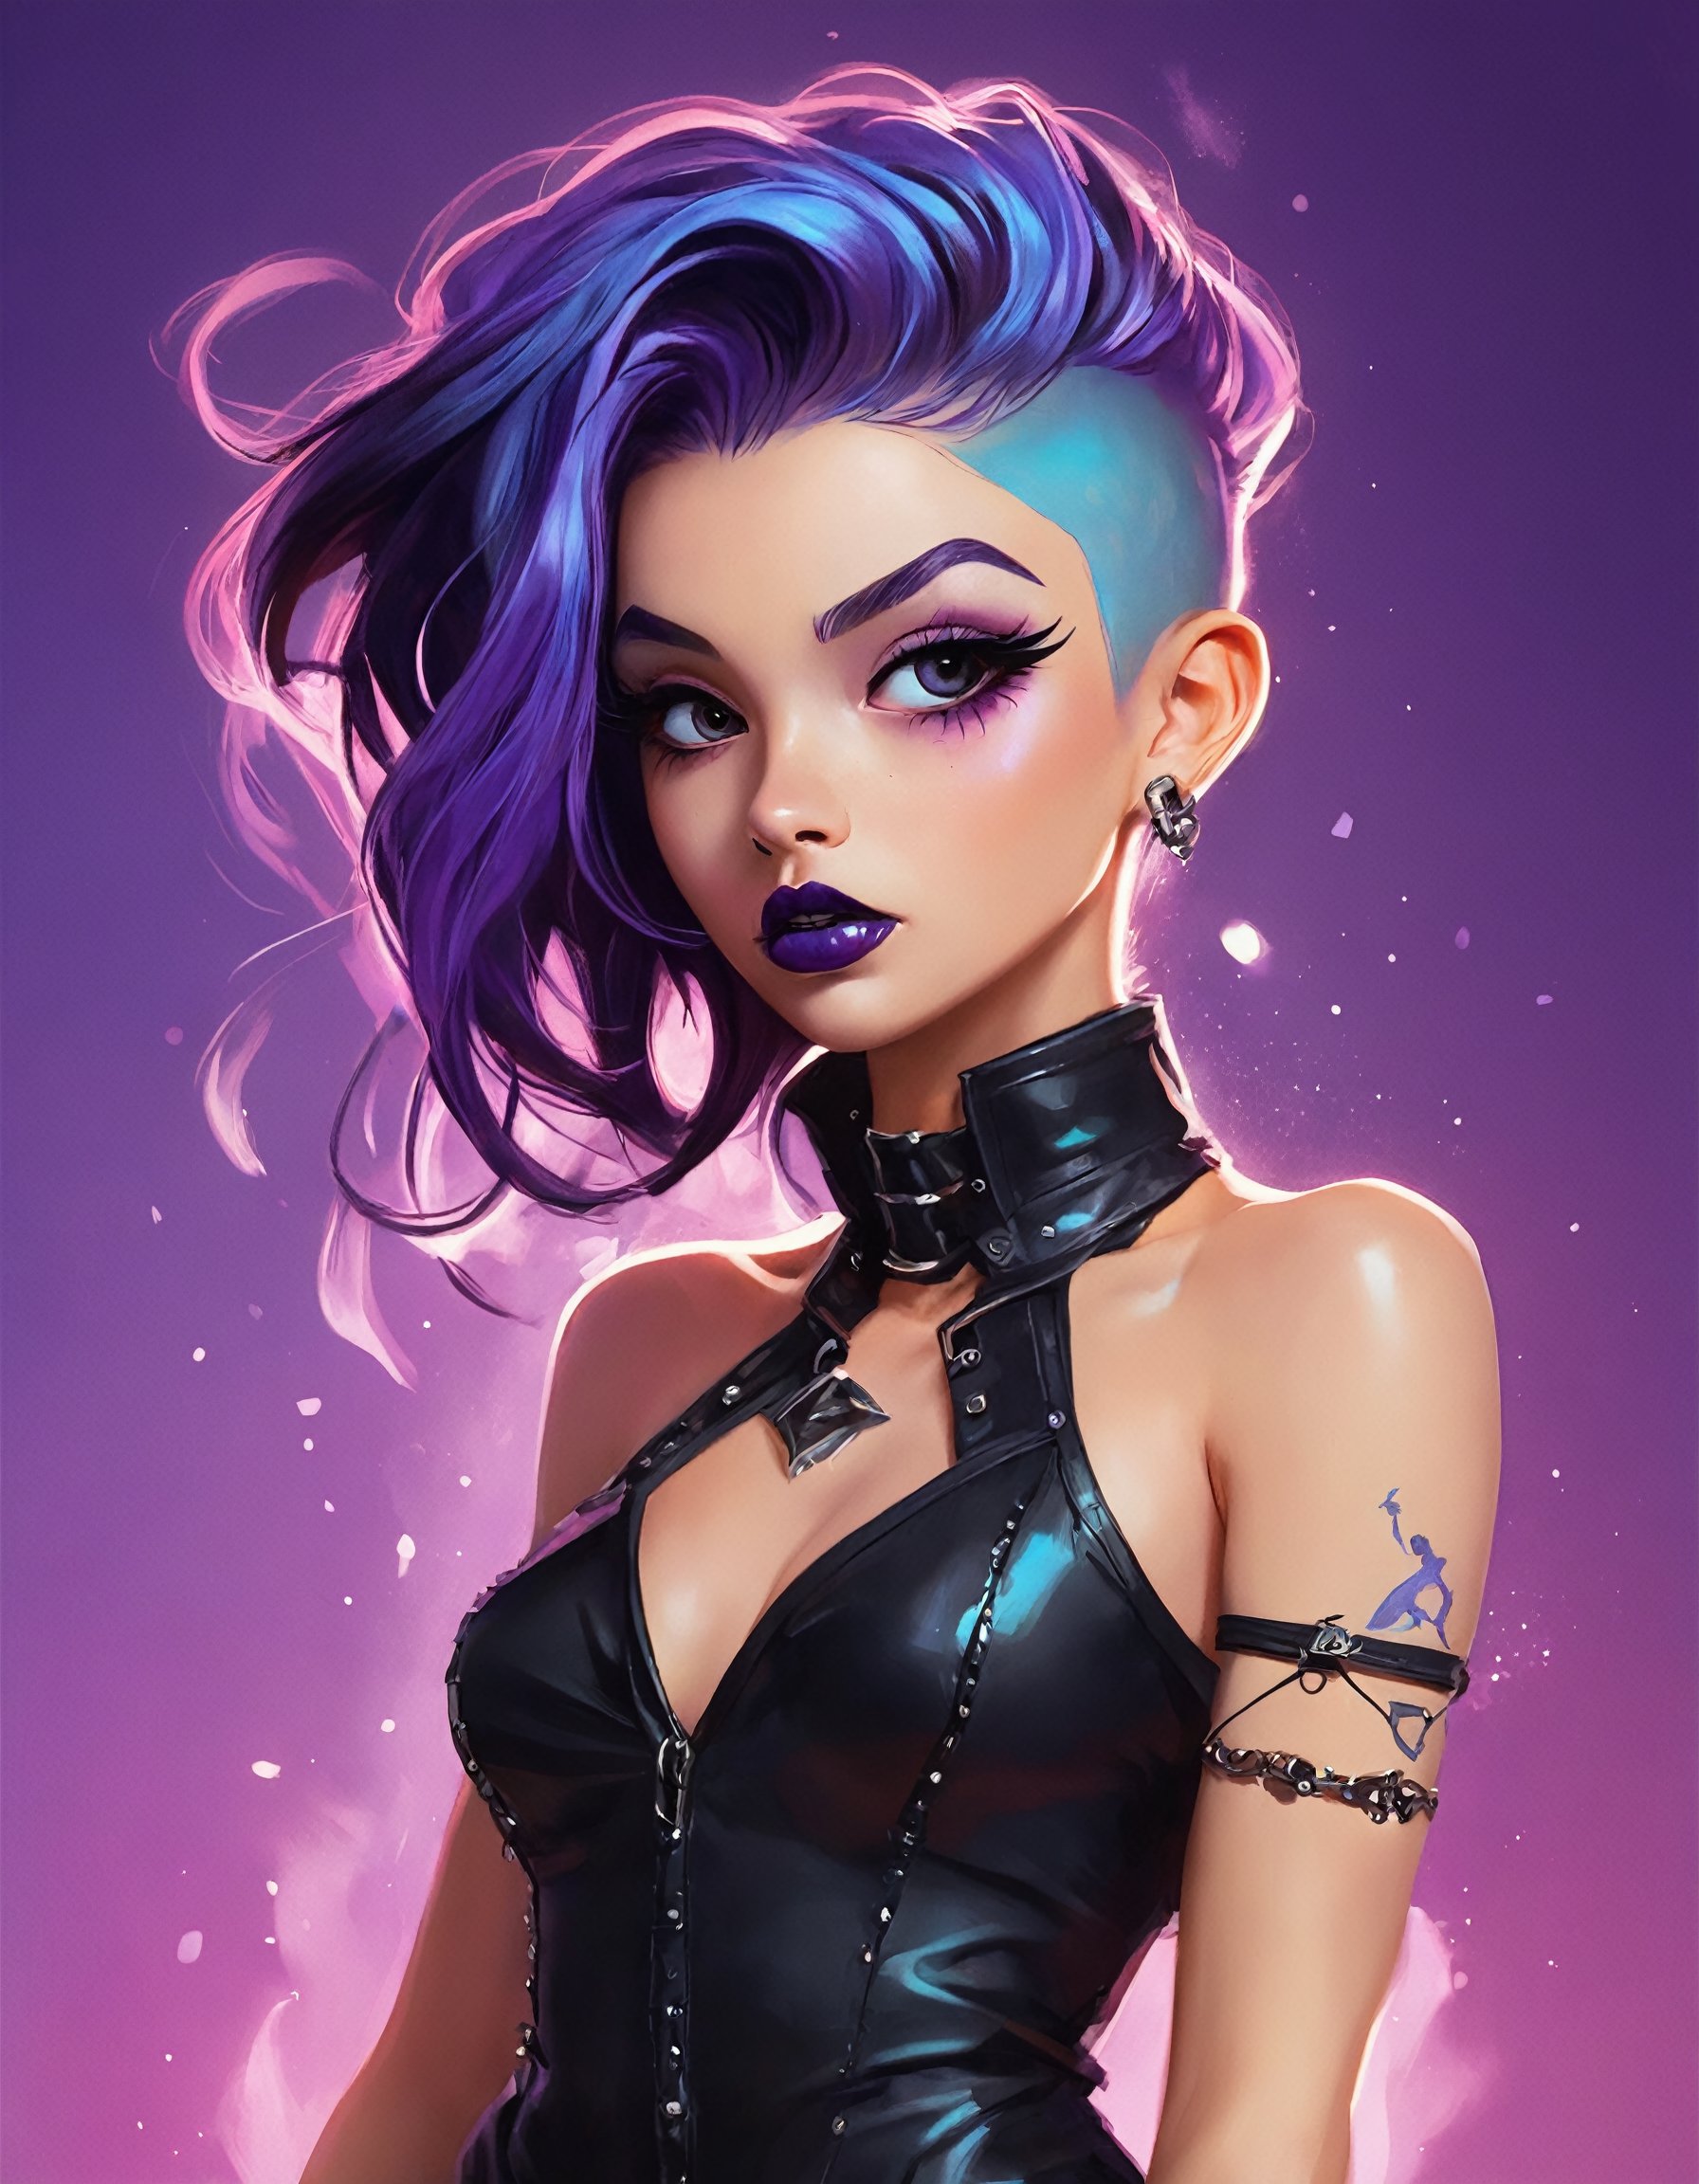 (Neeko:1.2), asymmetrical hair with shaved sides and a purple hue, dark eyeshadow, smokey eyes with hints of black and purple and black lipstick, kneelength dress with a blazerstyle top, spiked choker and a studded leather harness, confident and playful demeanor with a rebellious edge, (perfect dreamy eyes), ((colorful abstract pop art background)), (scattered wisps of magical energy), light refractions, floating dust particles